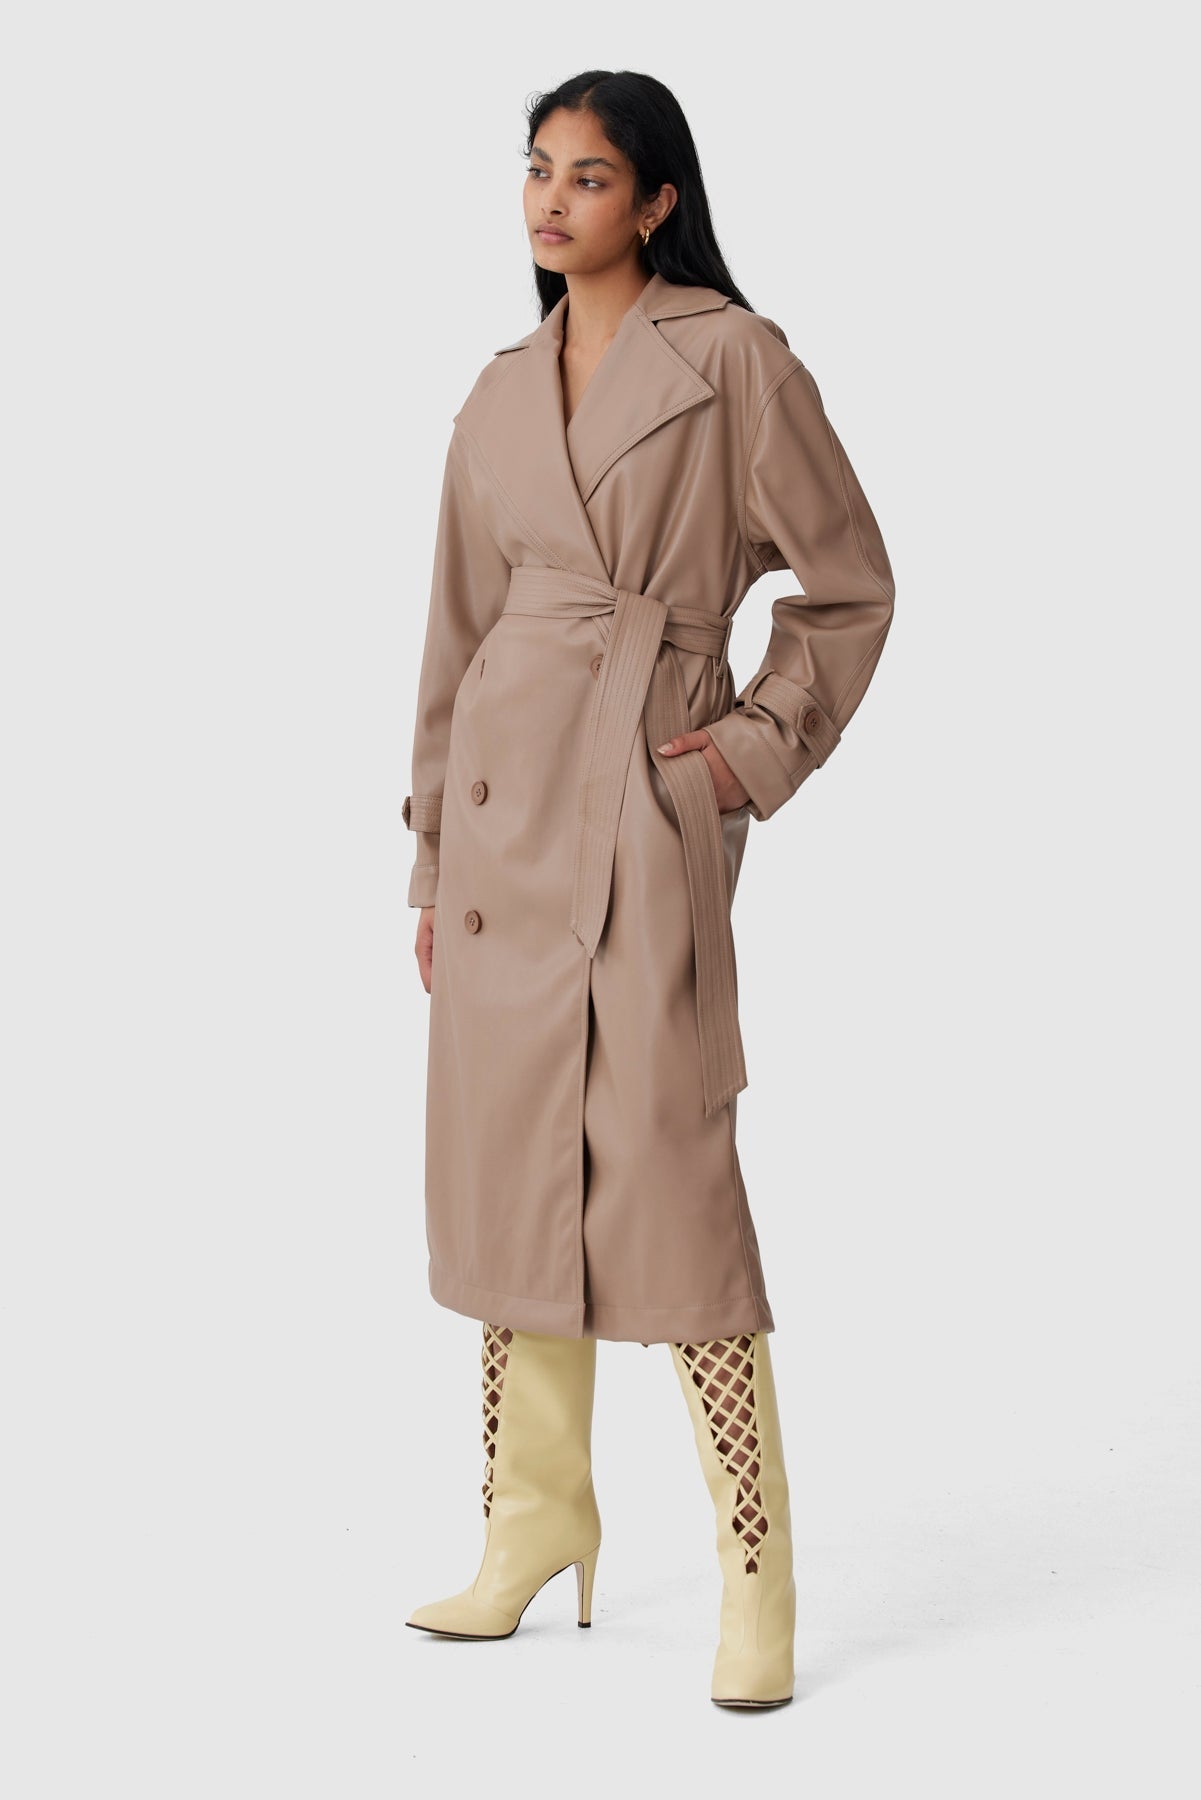 C/MEO Collective - Elation Trench - Tan